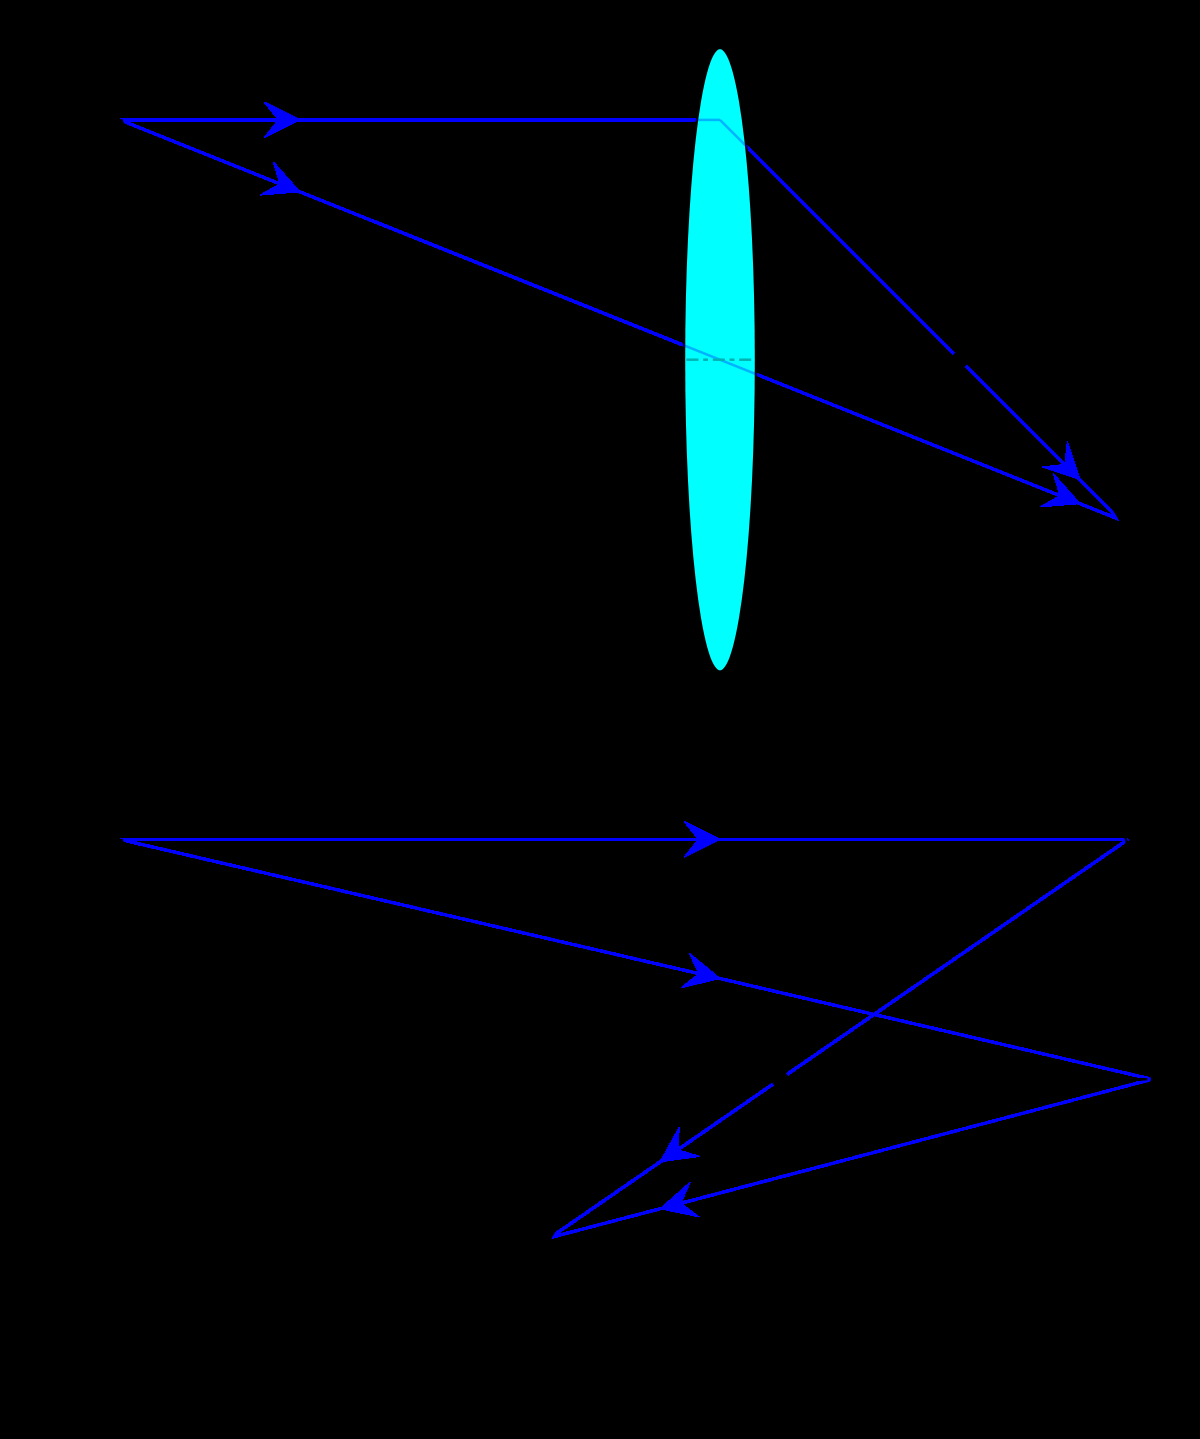 Ray Diagram Definition Real Image Wikipedia